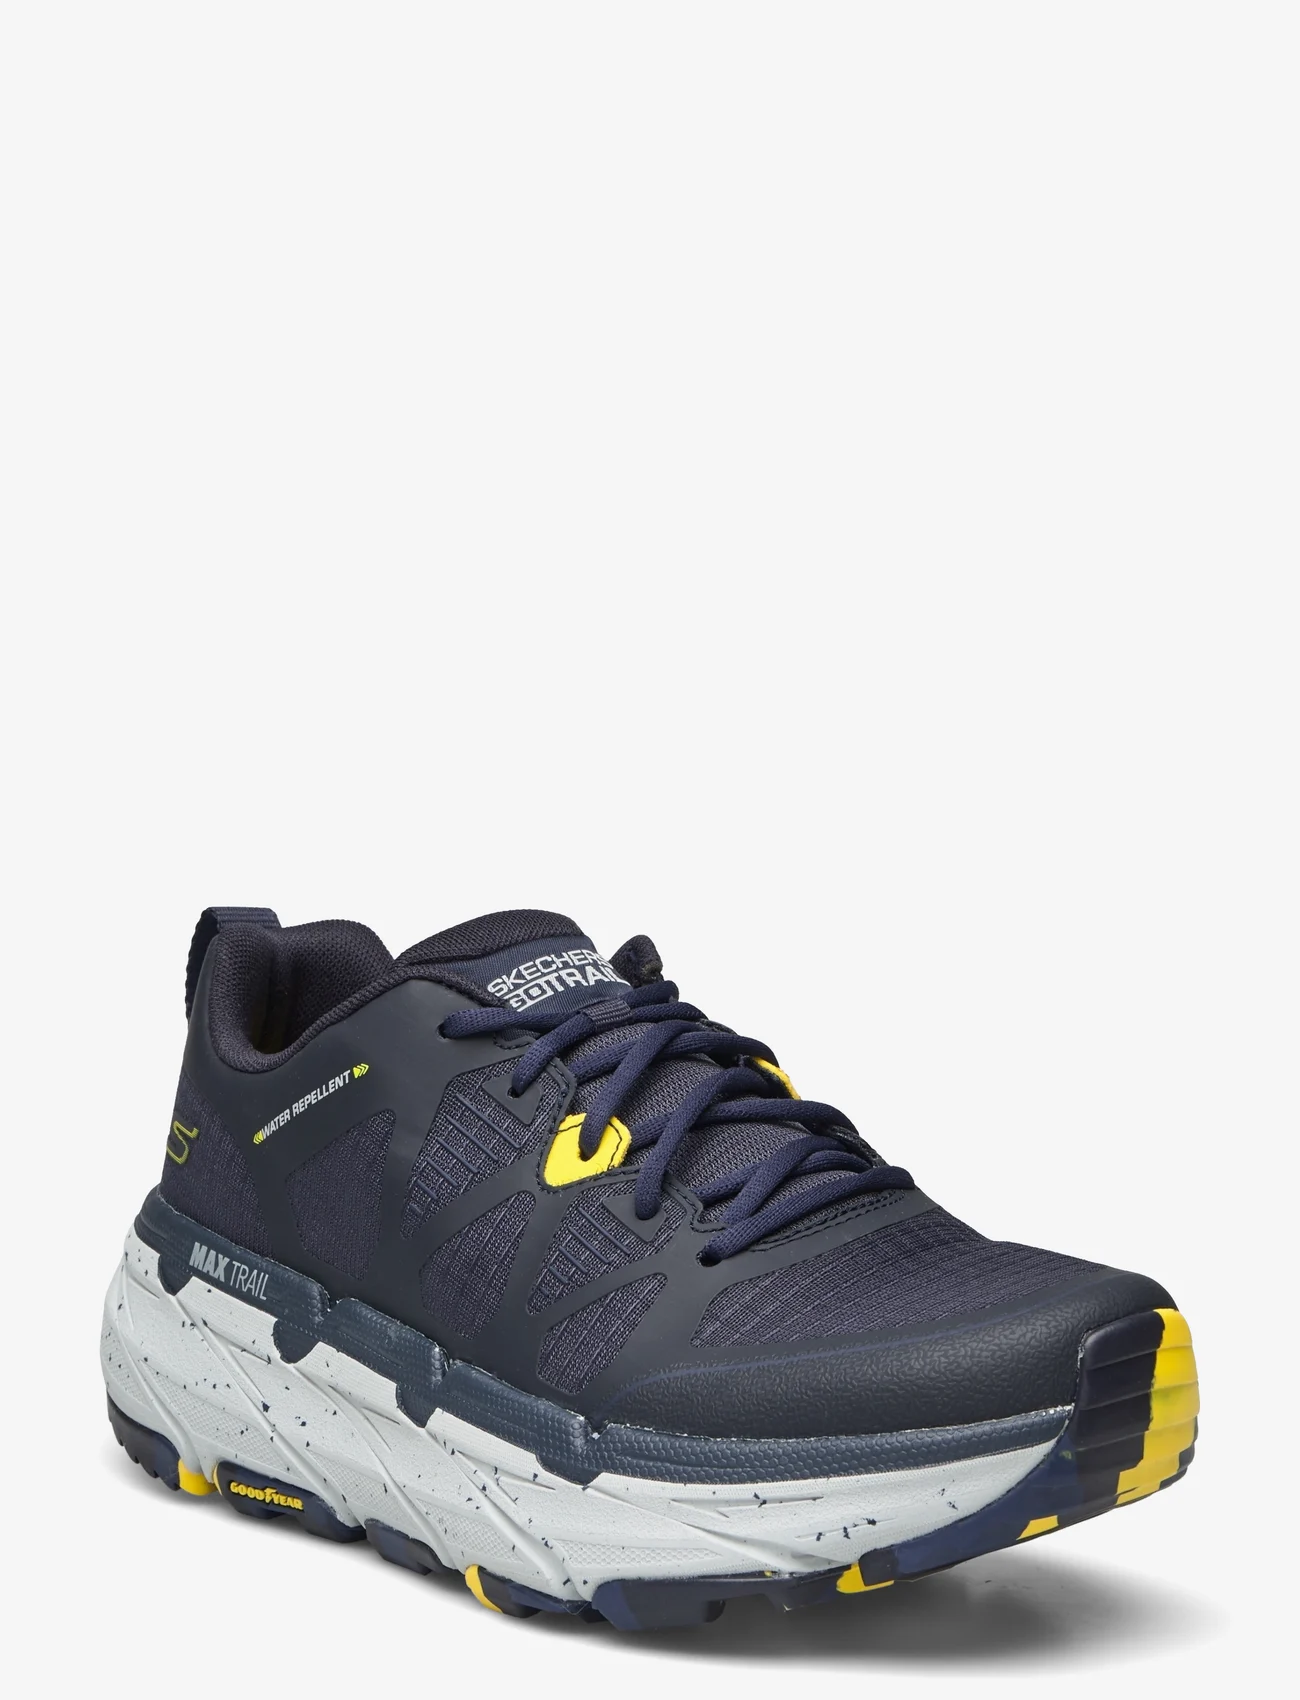 Skechers - Mens Max Cushioning Premier Trail - Water Rep - loopschoenen - nvy navy - 0